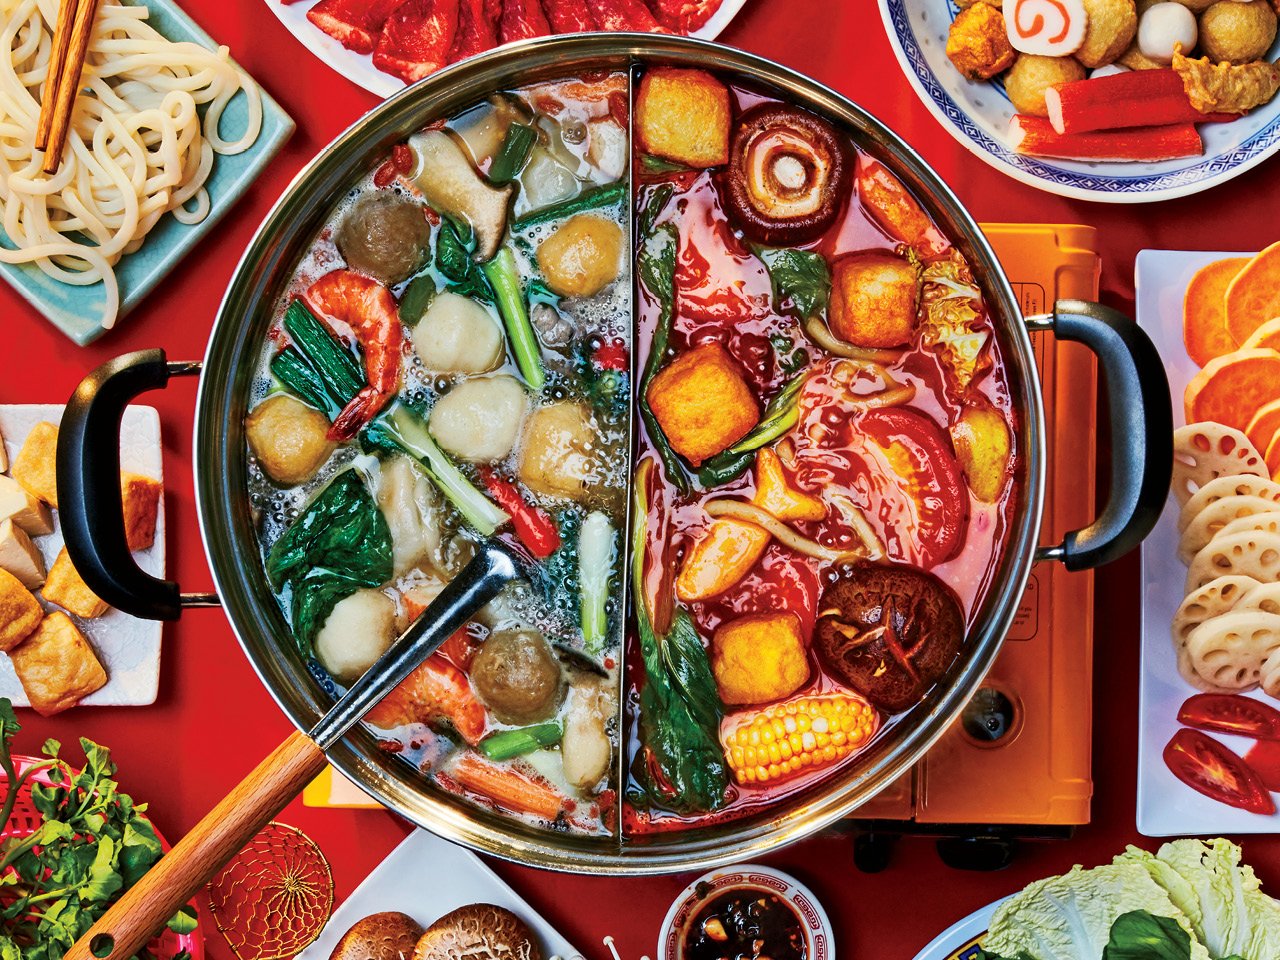 Best This Is How To Make The Perfect Chinese Hot Pot At Home Recipes, Comfort Food